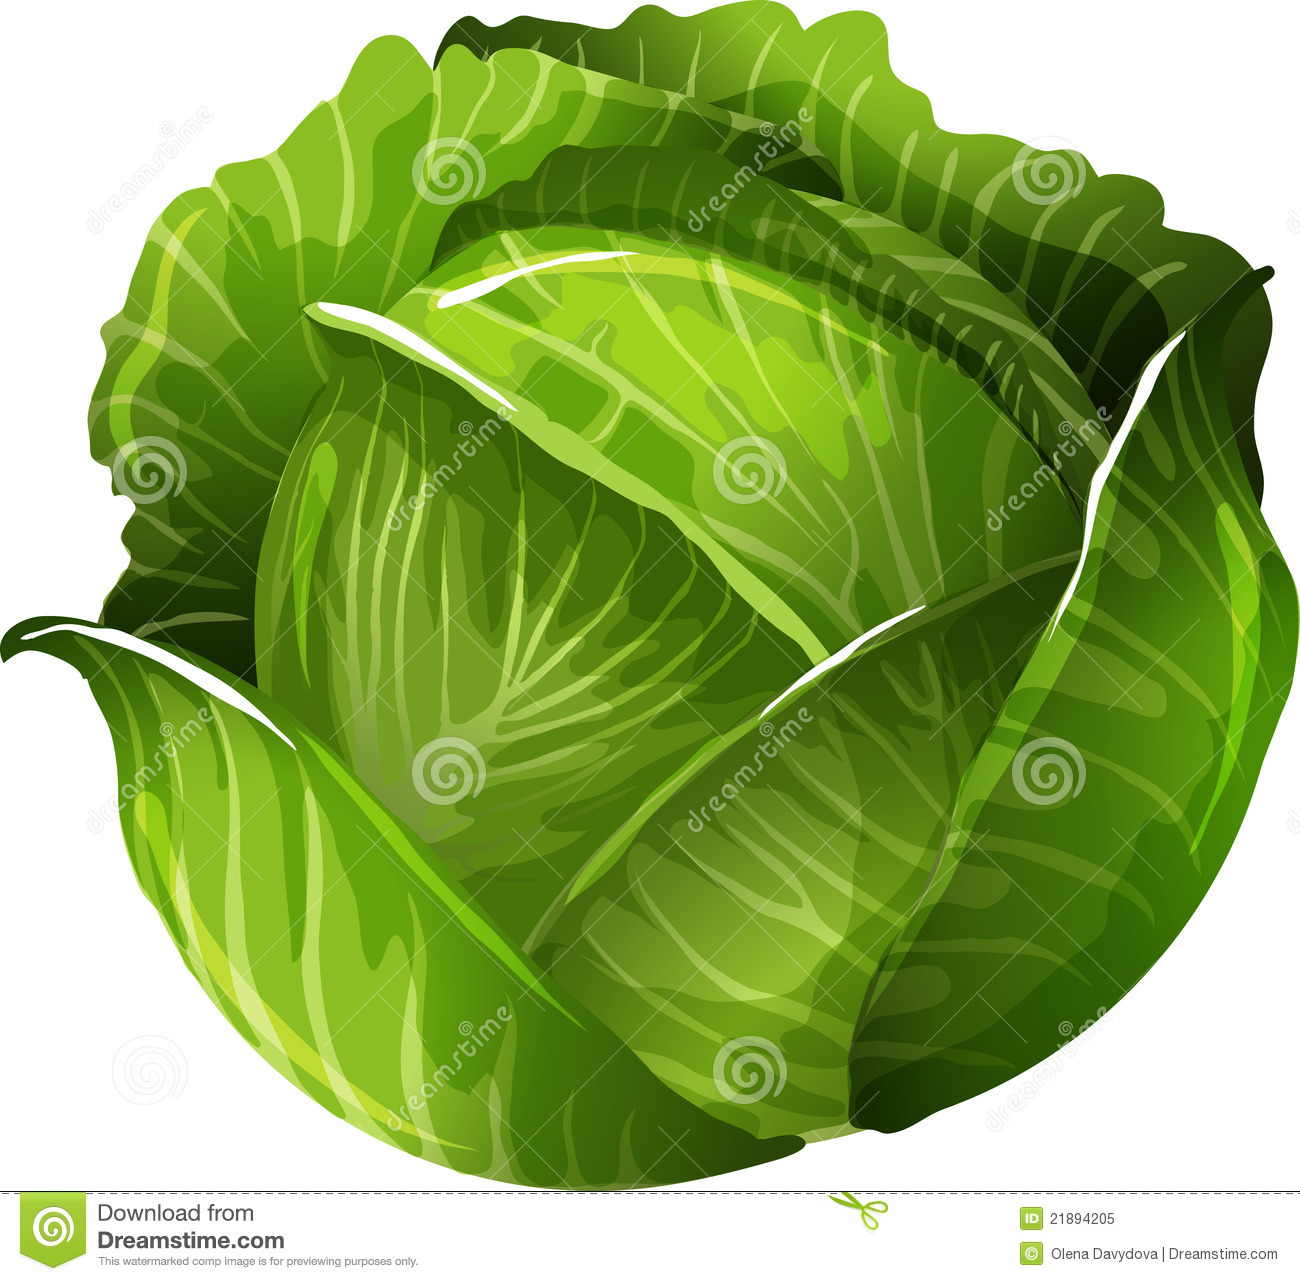 Cabbage Clipart Images   Pictures   Becuo